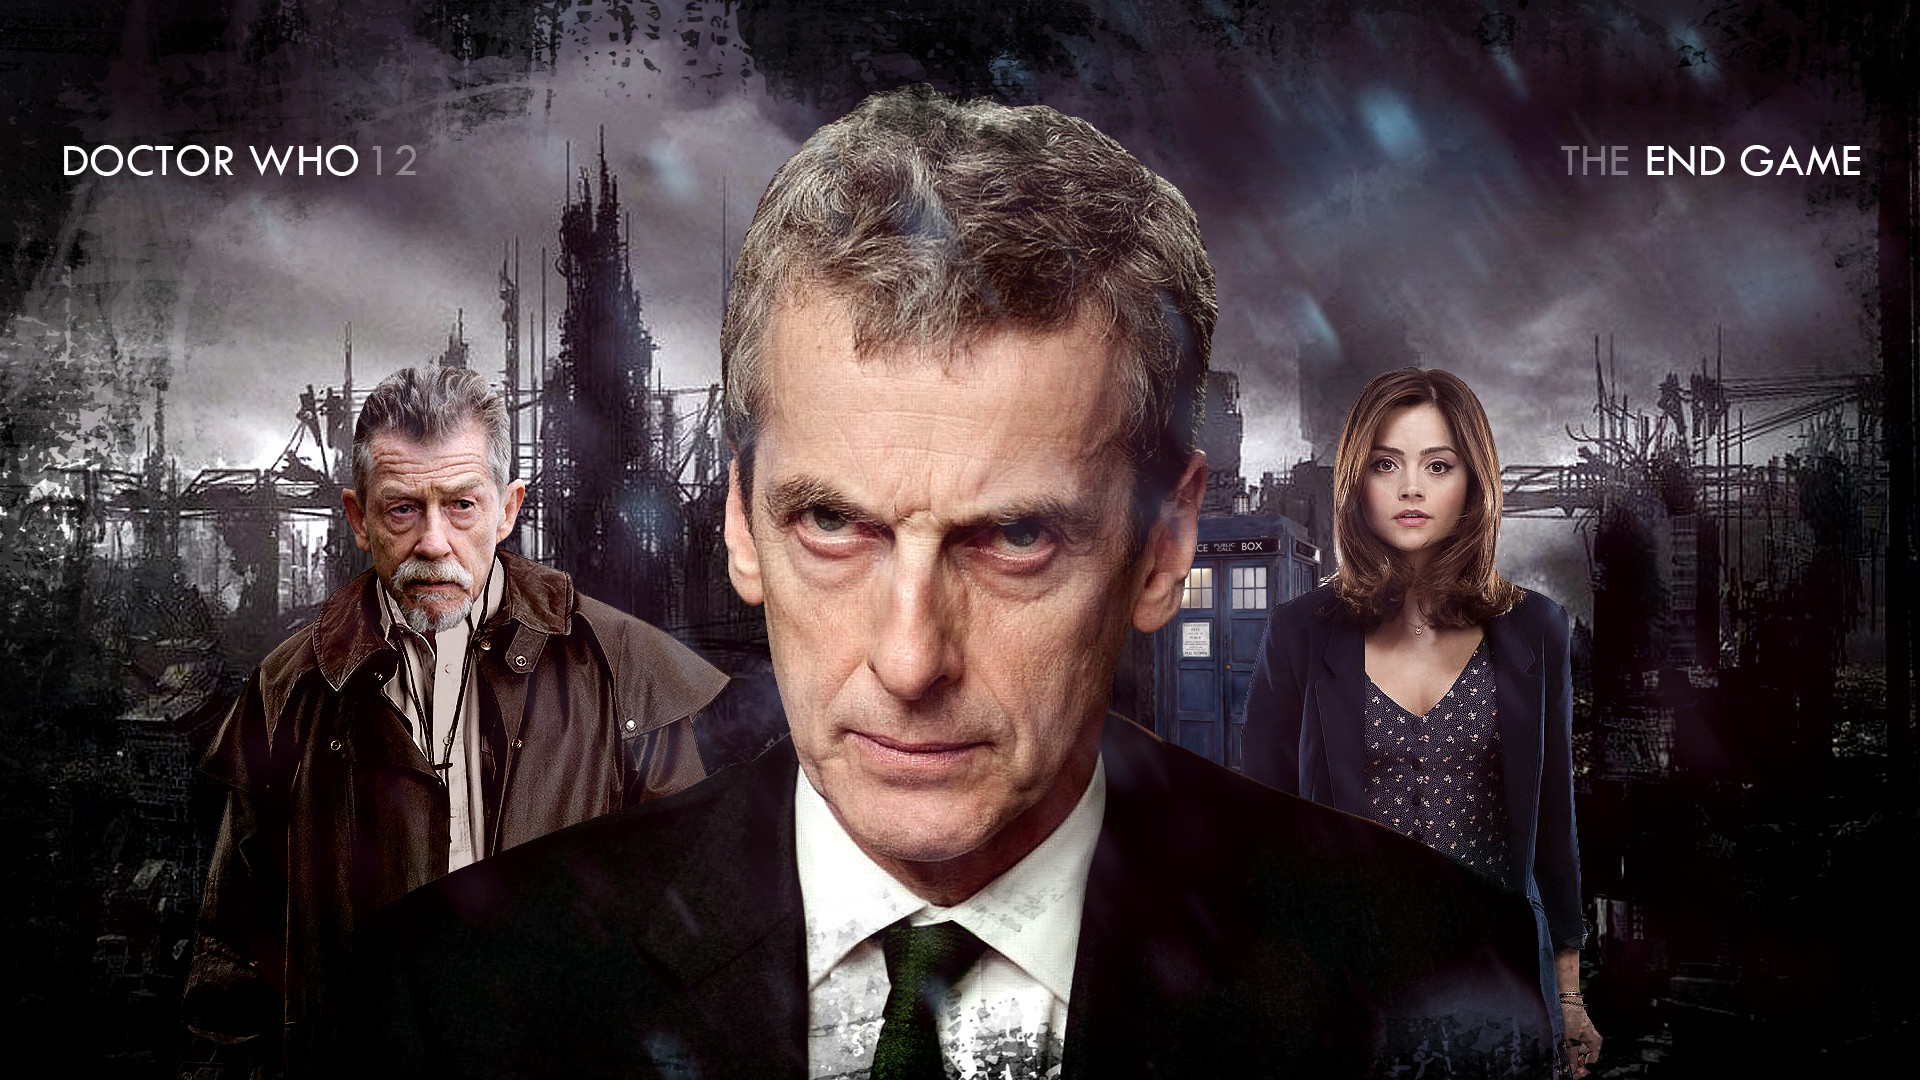 1920x1080 More Doctor Who fanart! The itch is getting worse though.